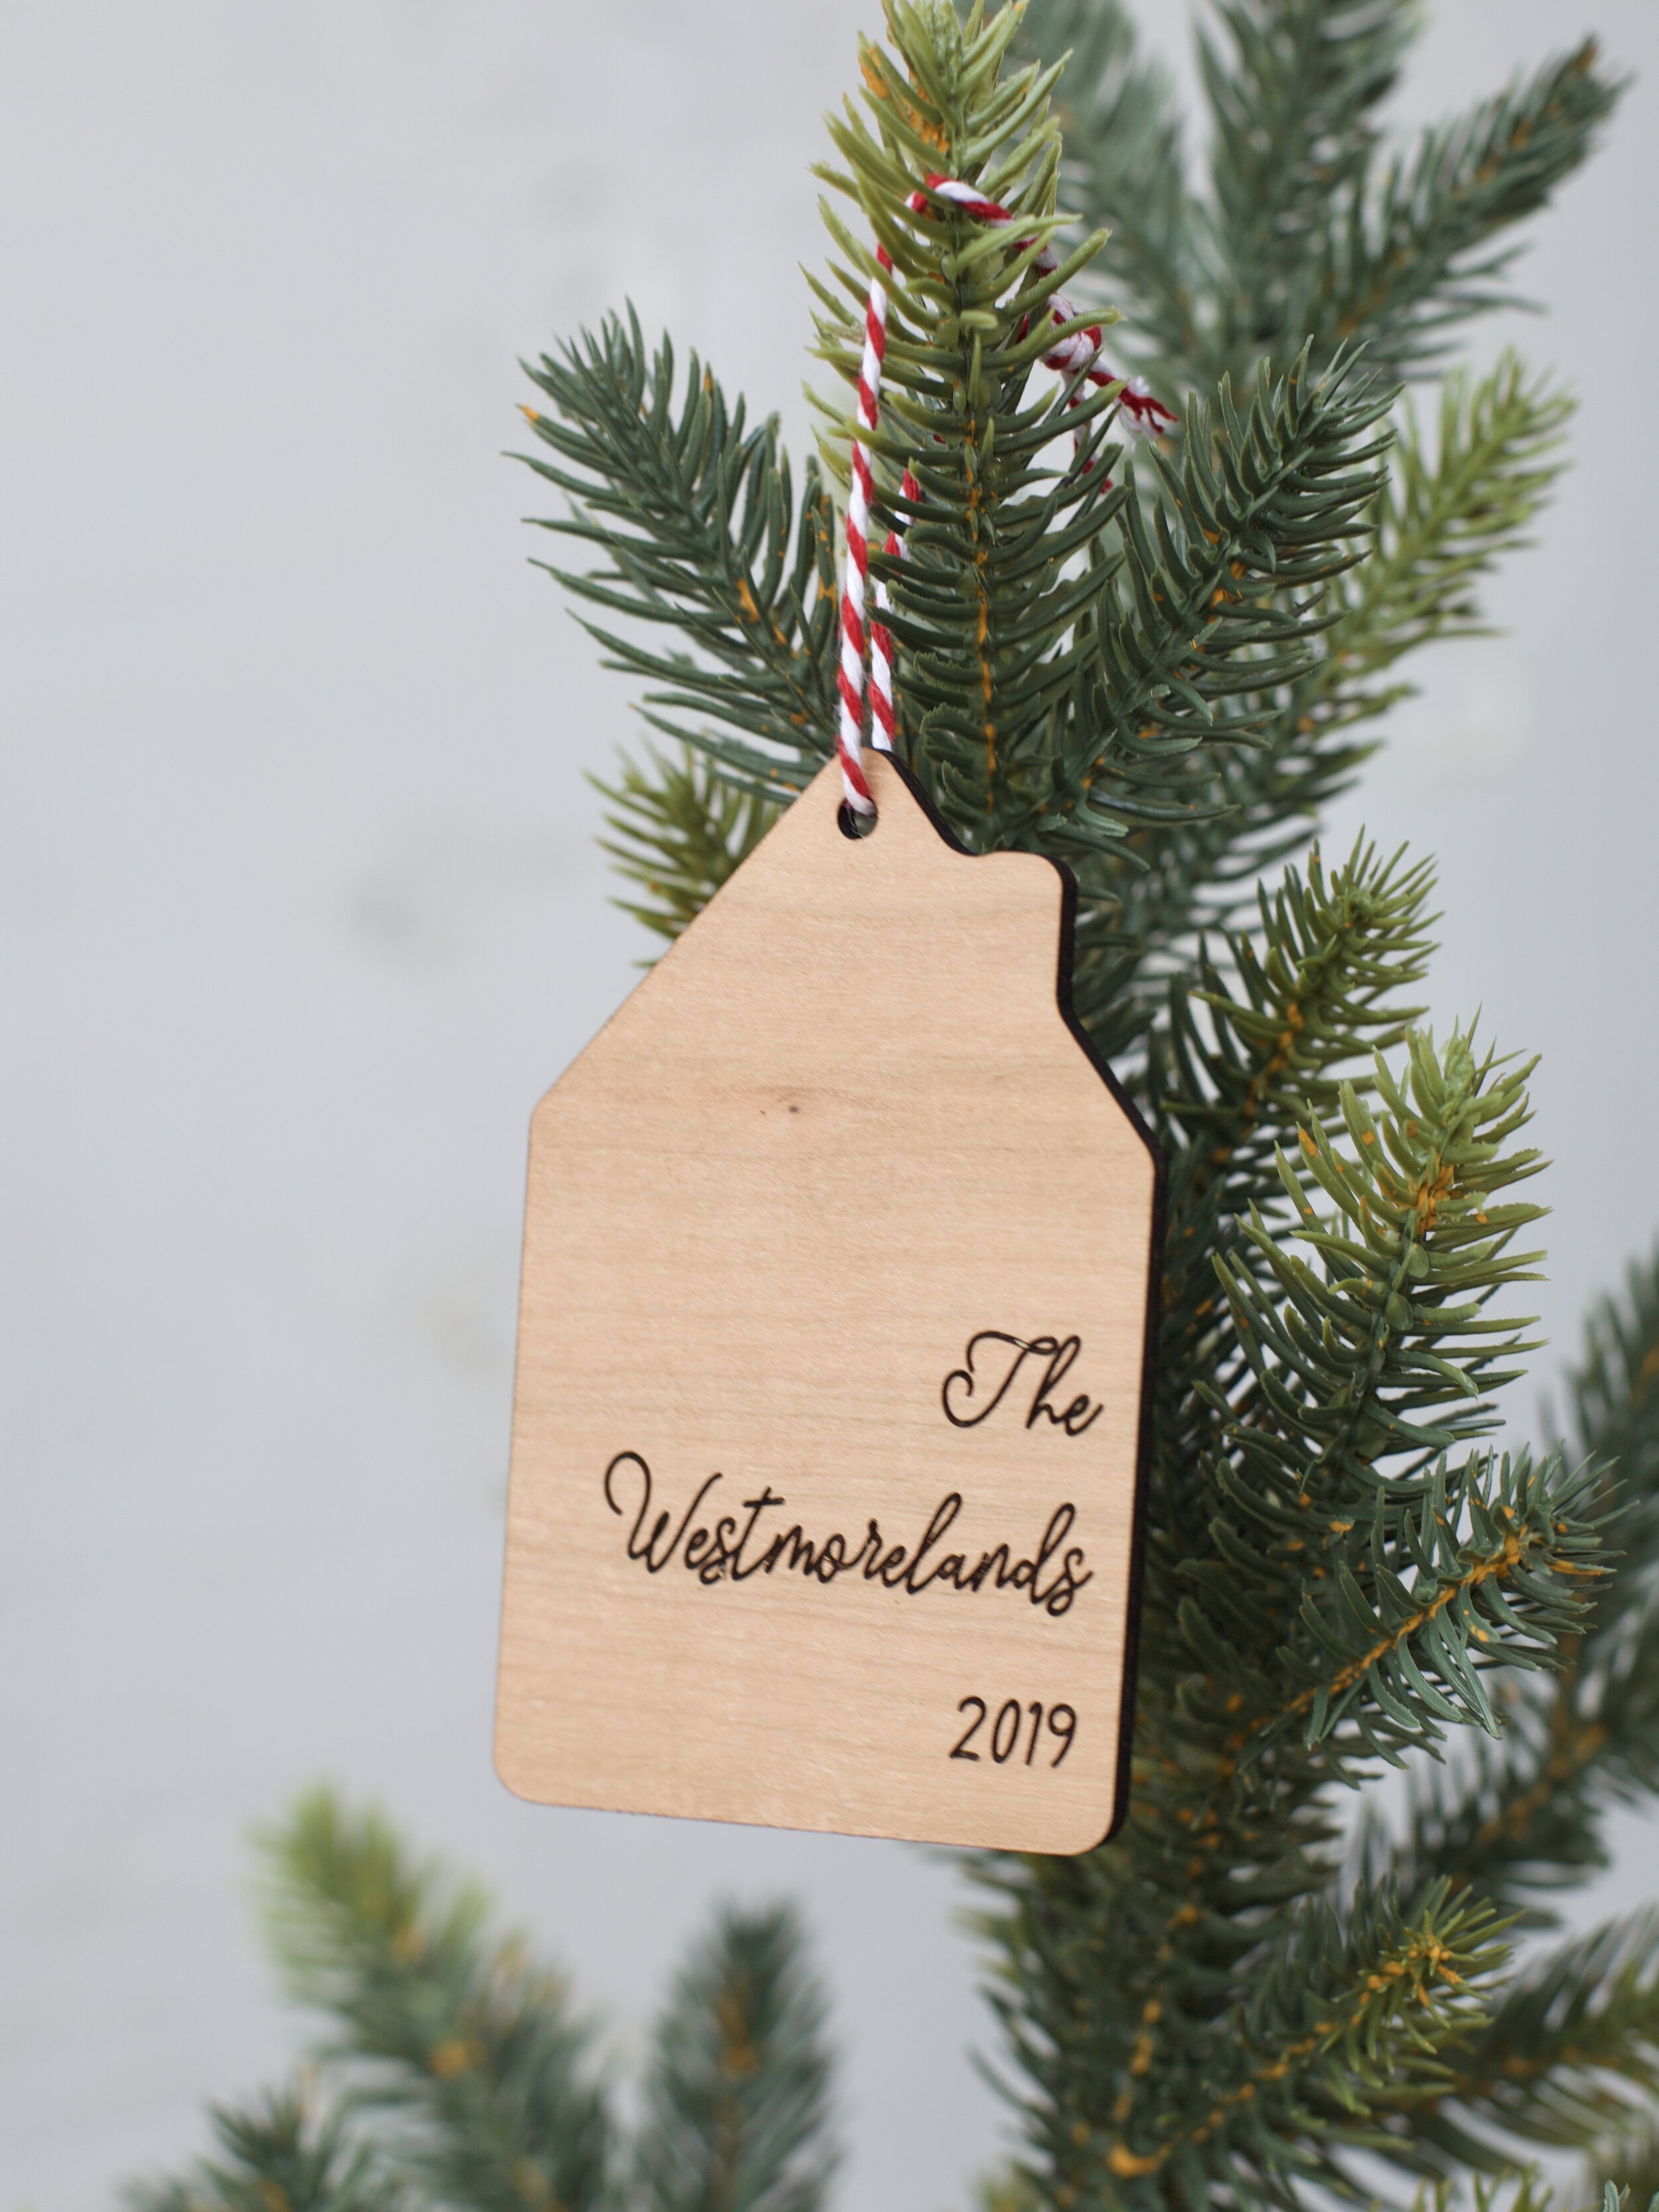 cut-etched-cherry-wood-house-christmas-ornament-last-name-couples.jpg